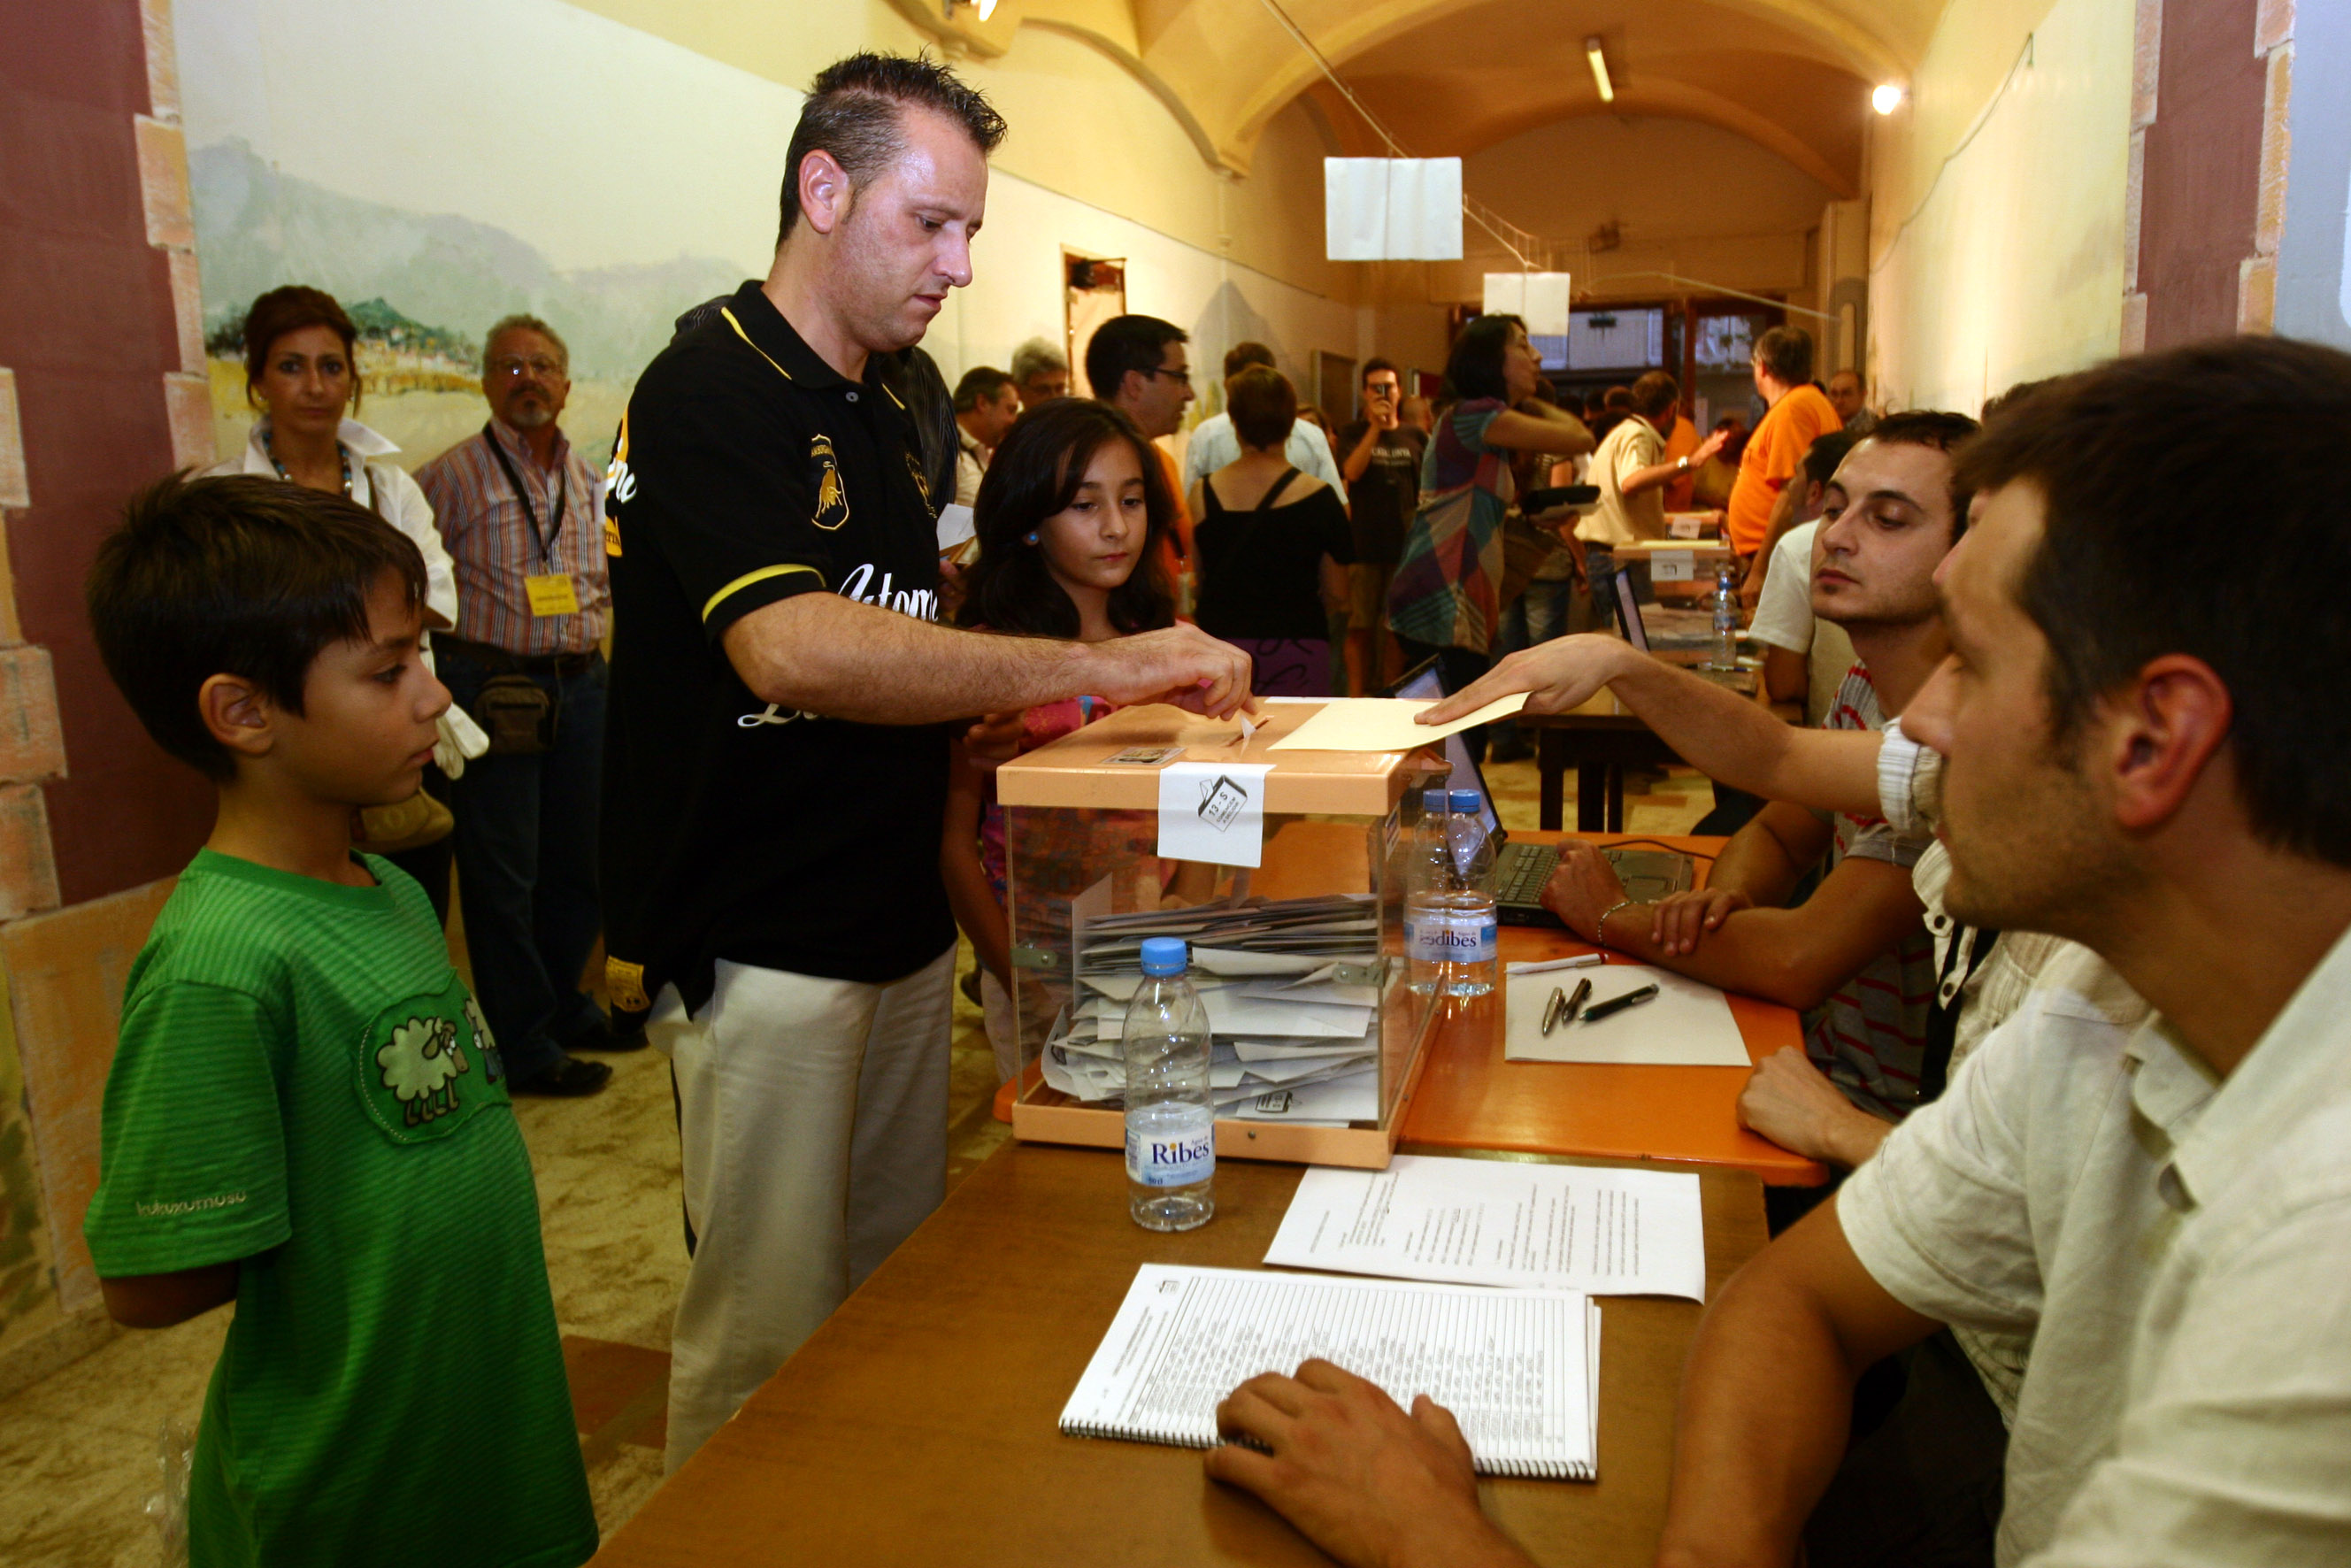 Voters casting their ballot in Arenys de Munt independence vote, on September 13, 2009 (by Albert Salamé)